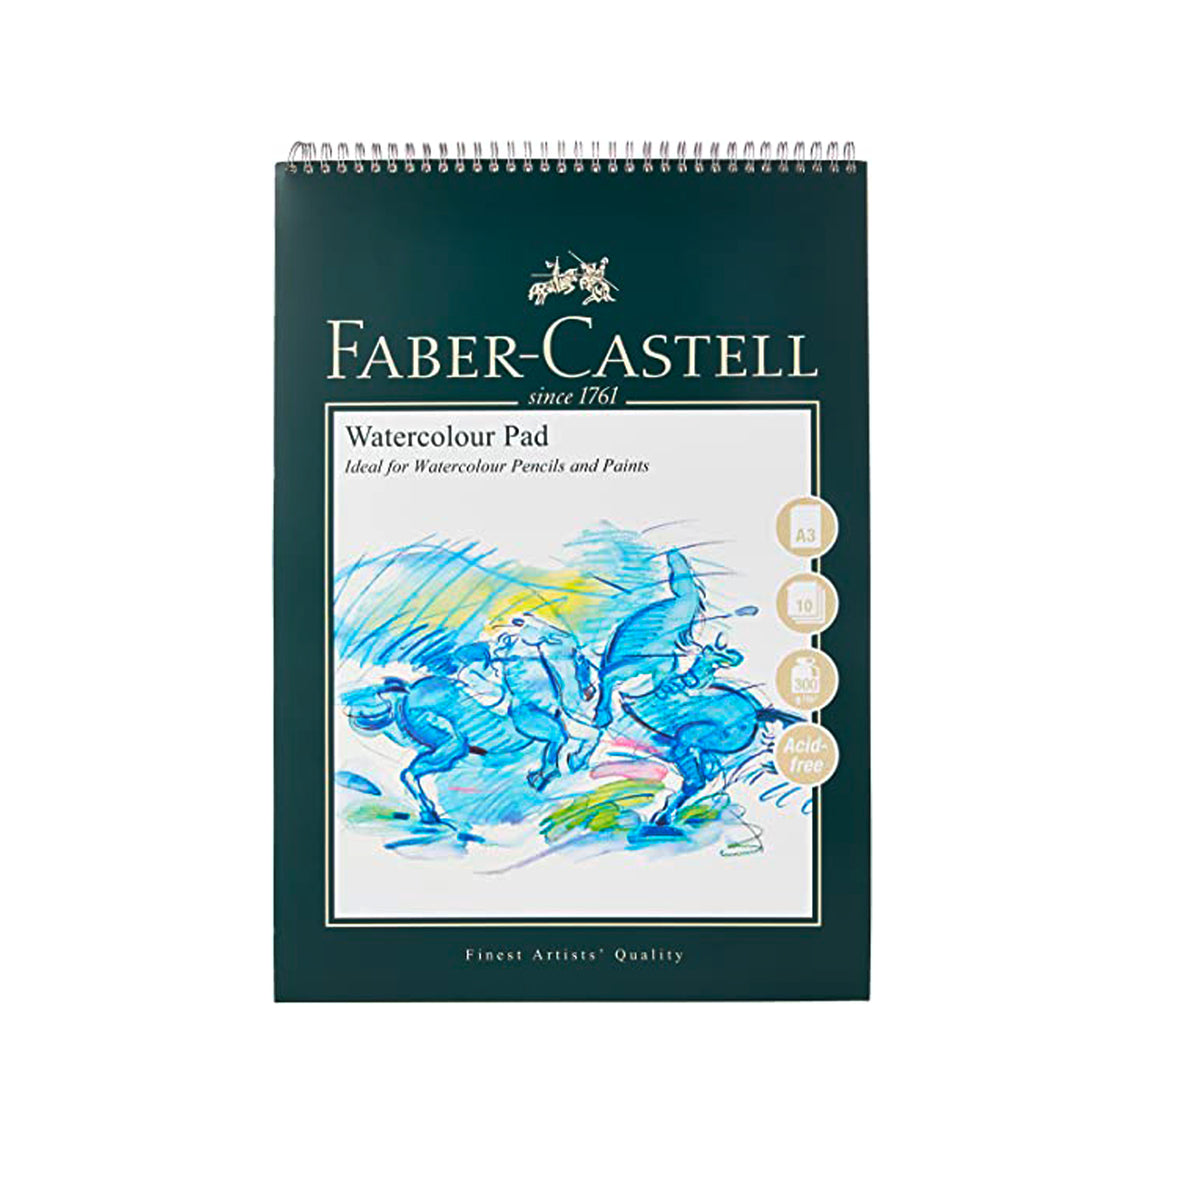 Faber-Castell Watercolour Pad A4 Spiral Pad